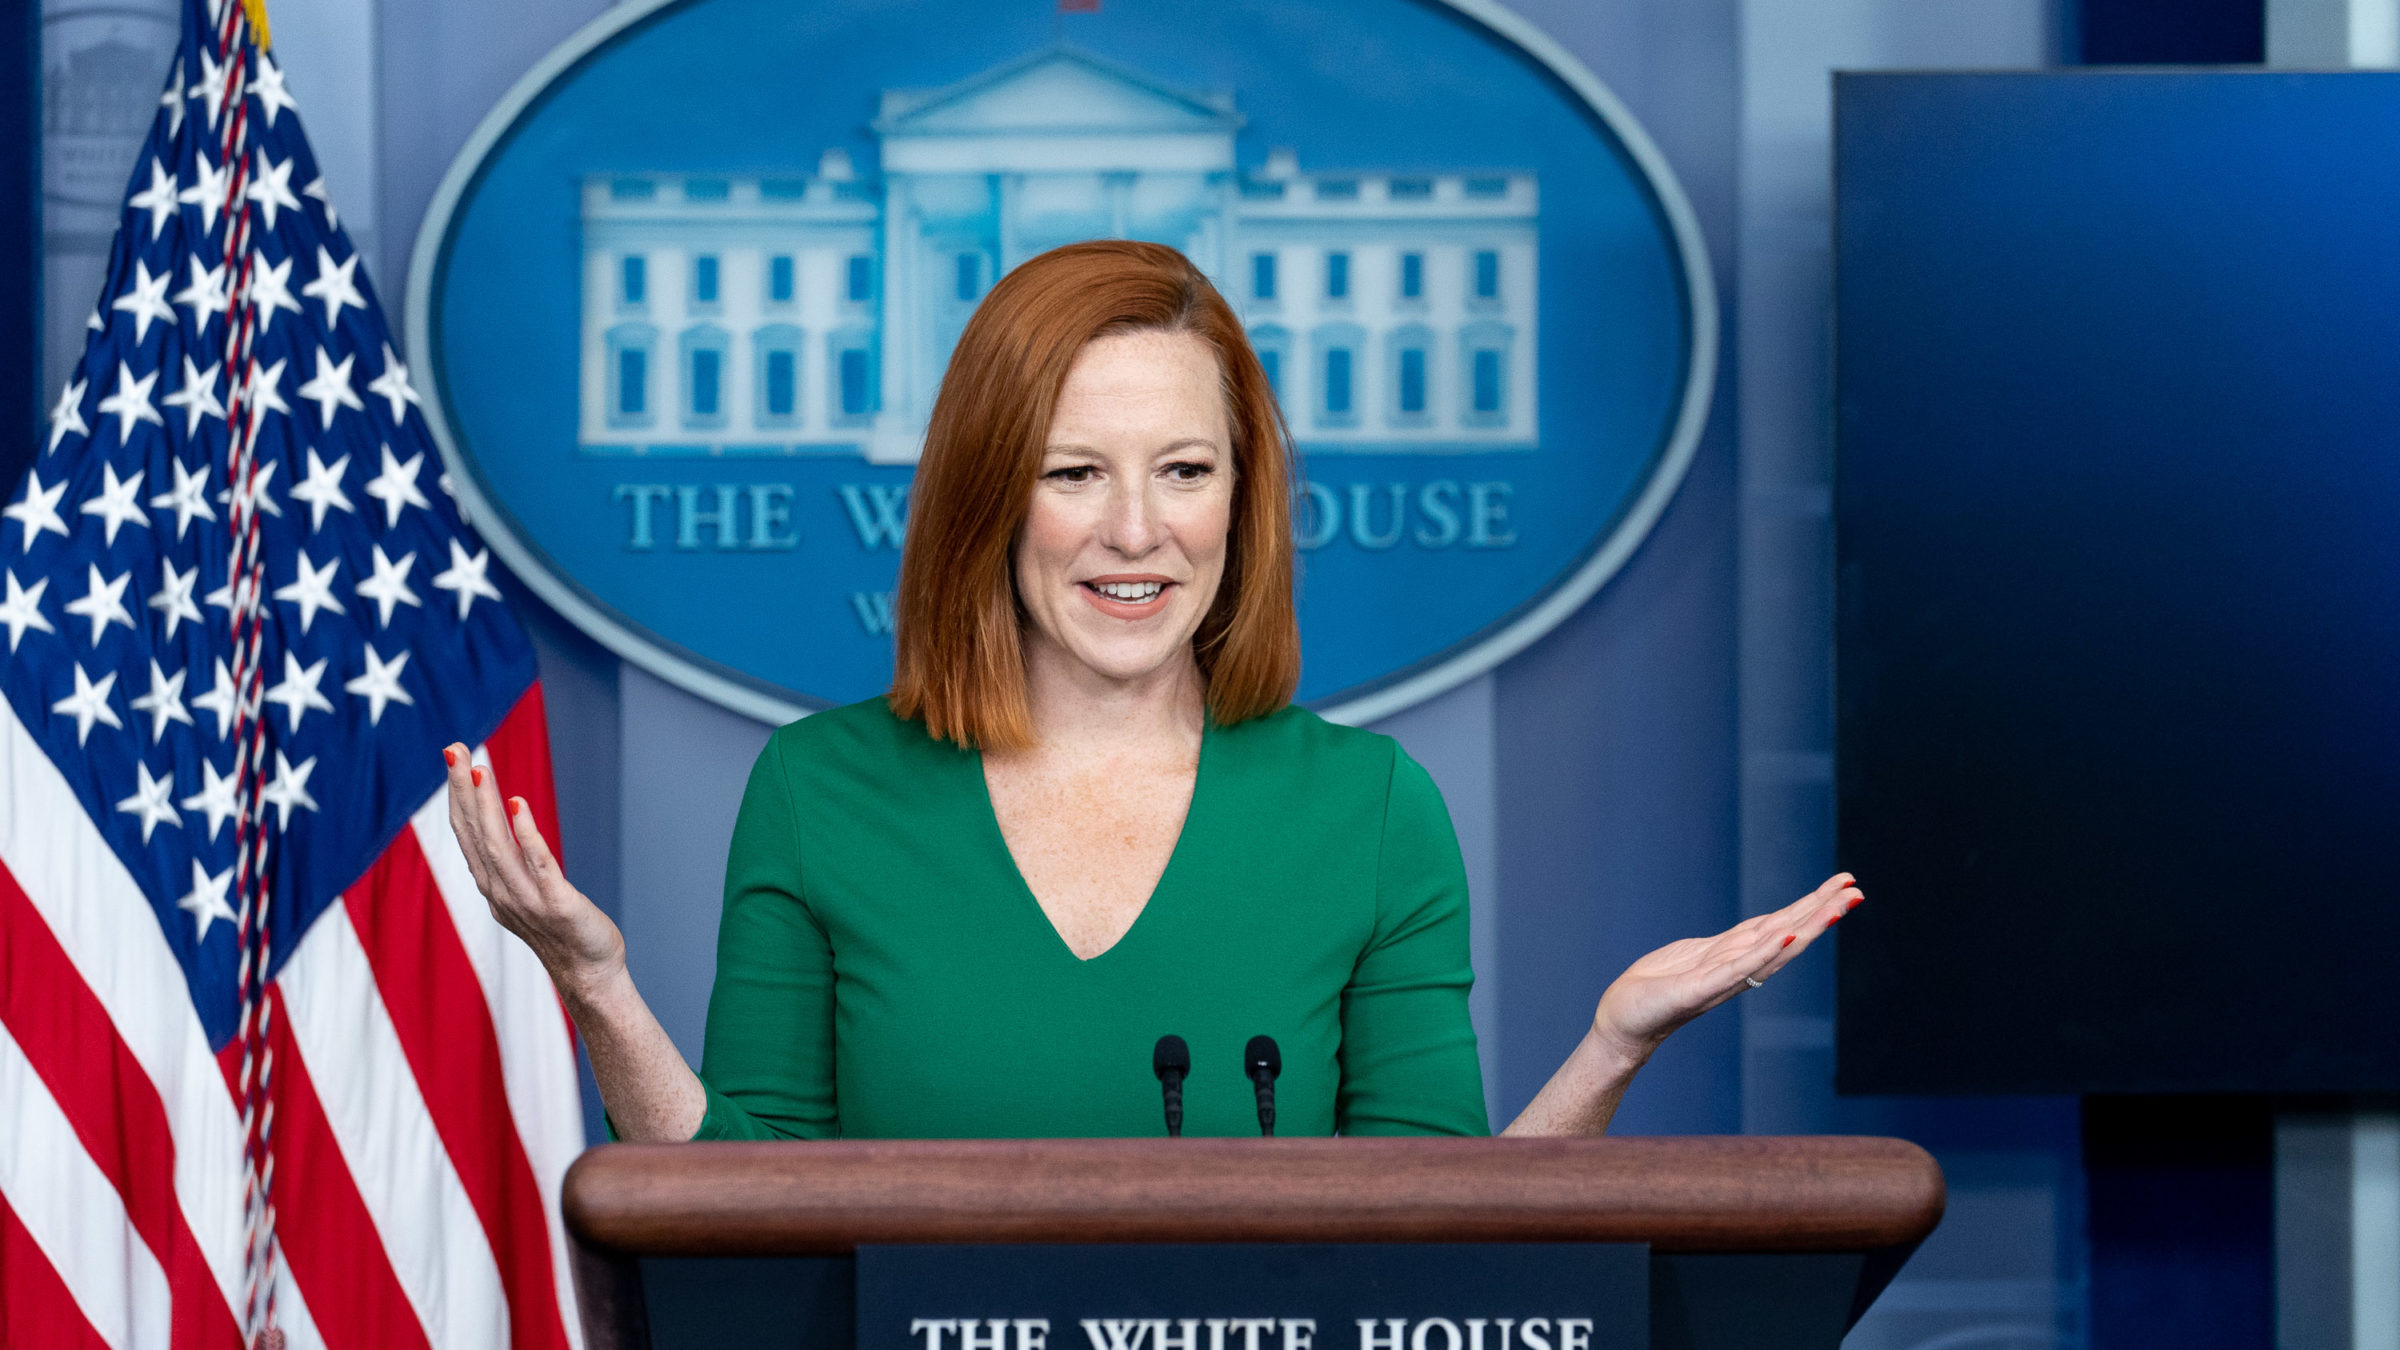 White House Press Secretary Jen Psaki holds a press briefing on Friday August 6, 2021, in the James S. Brady Press Briefing Room of the White House. (Official White House Photo by Erin Scott)